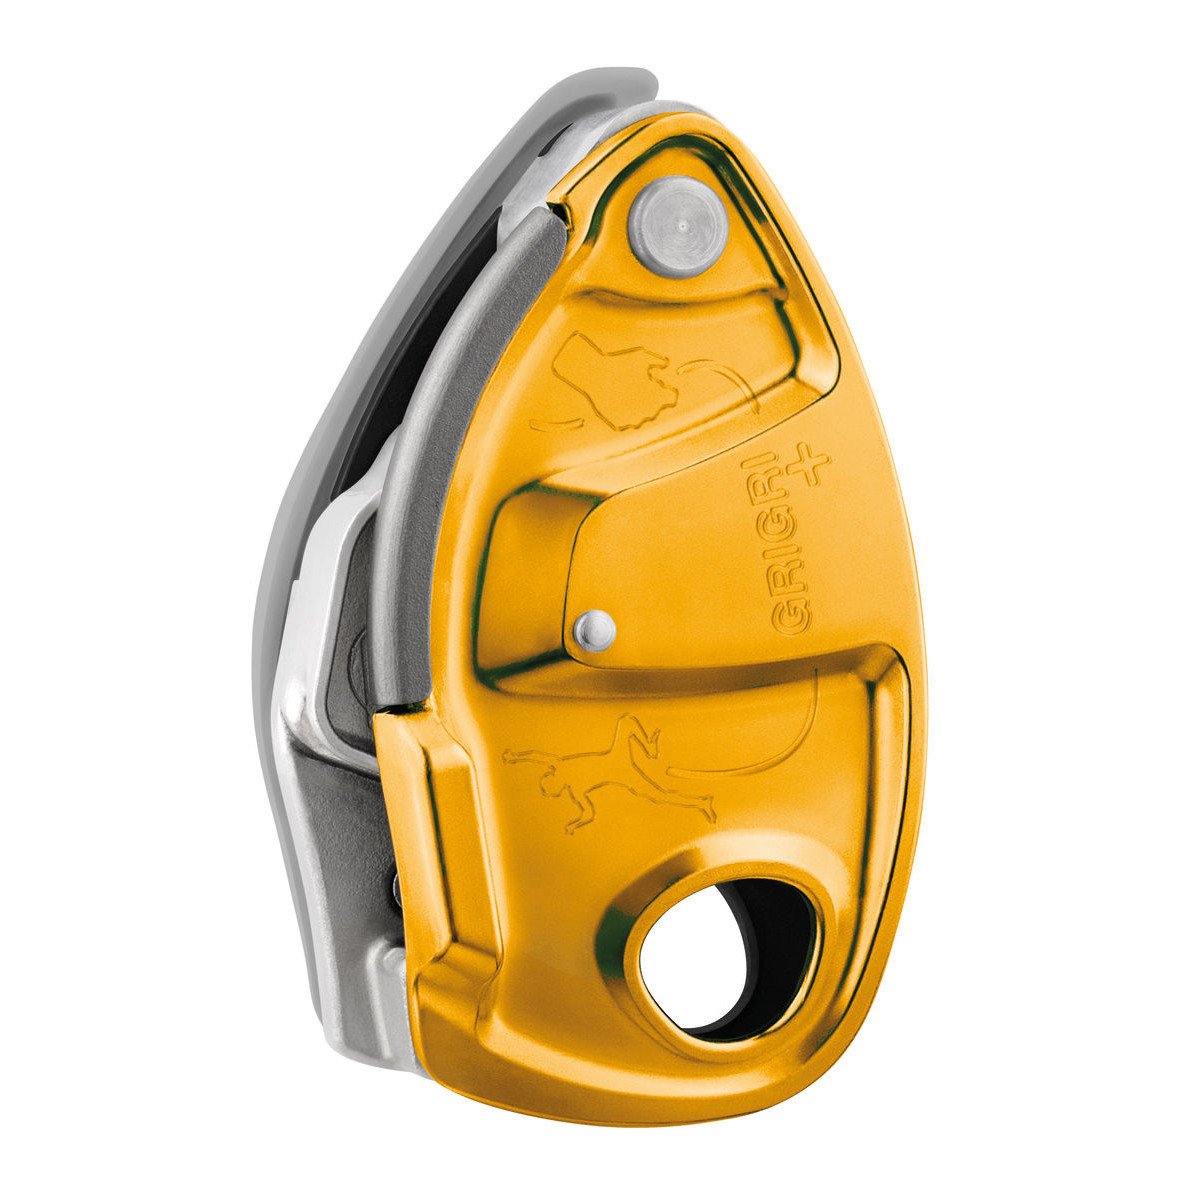 Petzl Grigri + climbing belay device, in gold colour